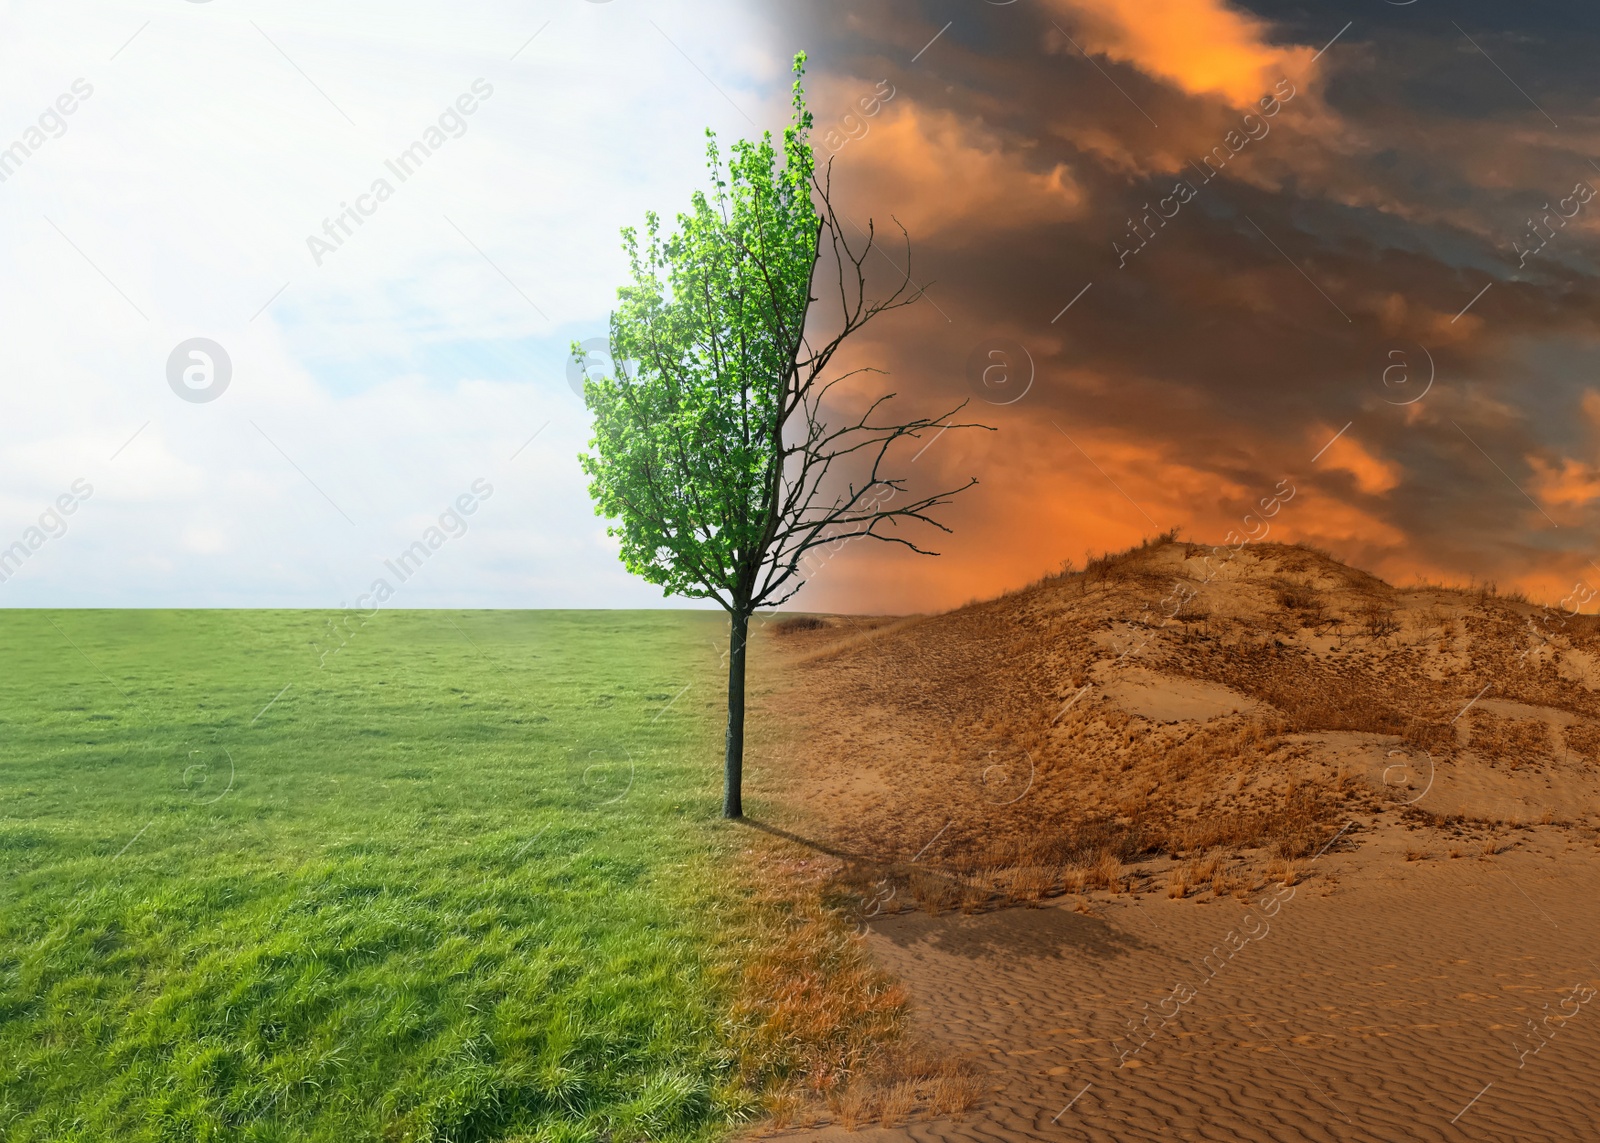 Image of Half dead and alive tree outdoors. Conceptual photo depicting Earth destroyed by global warming